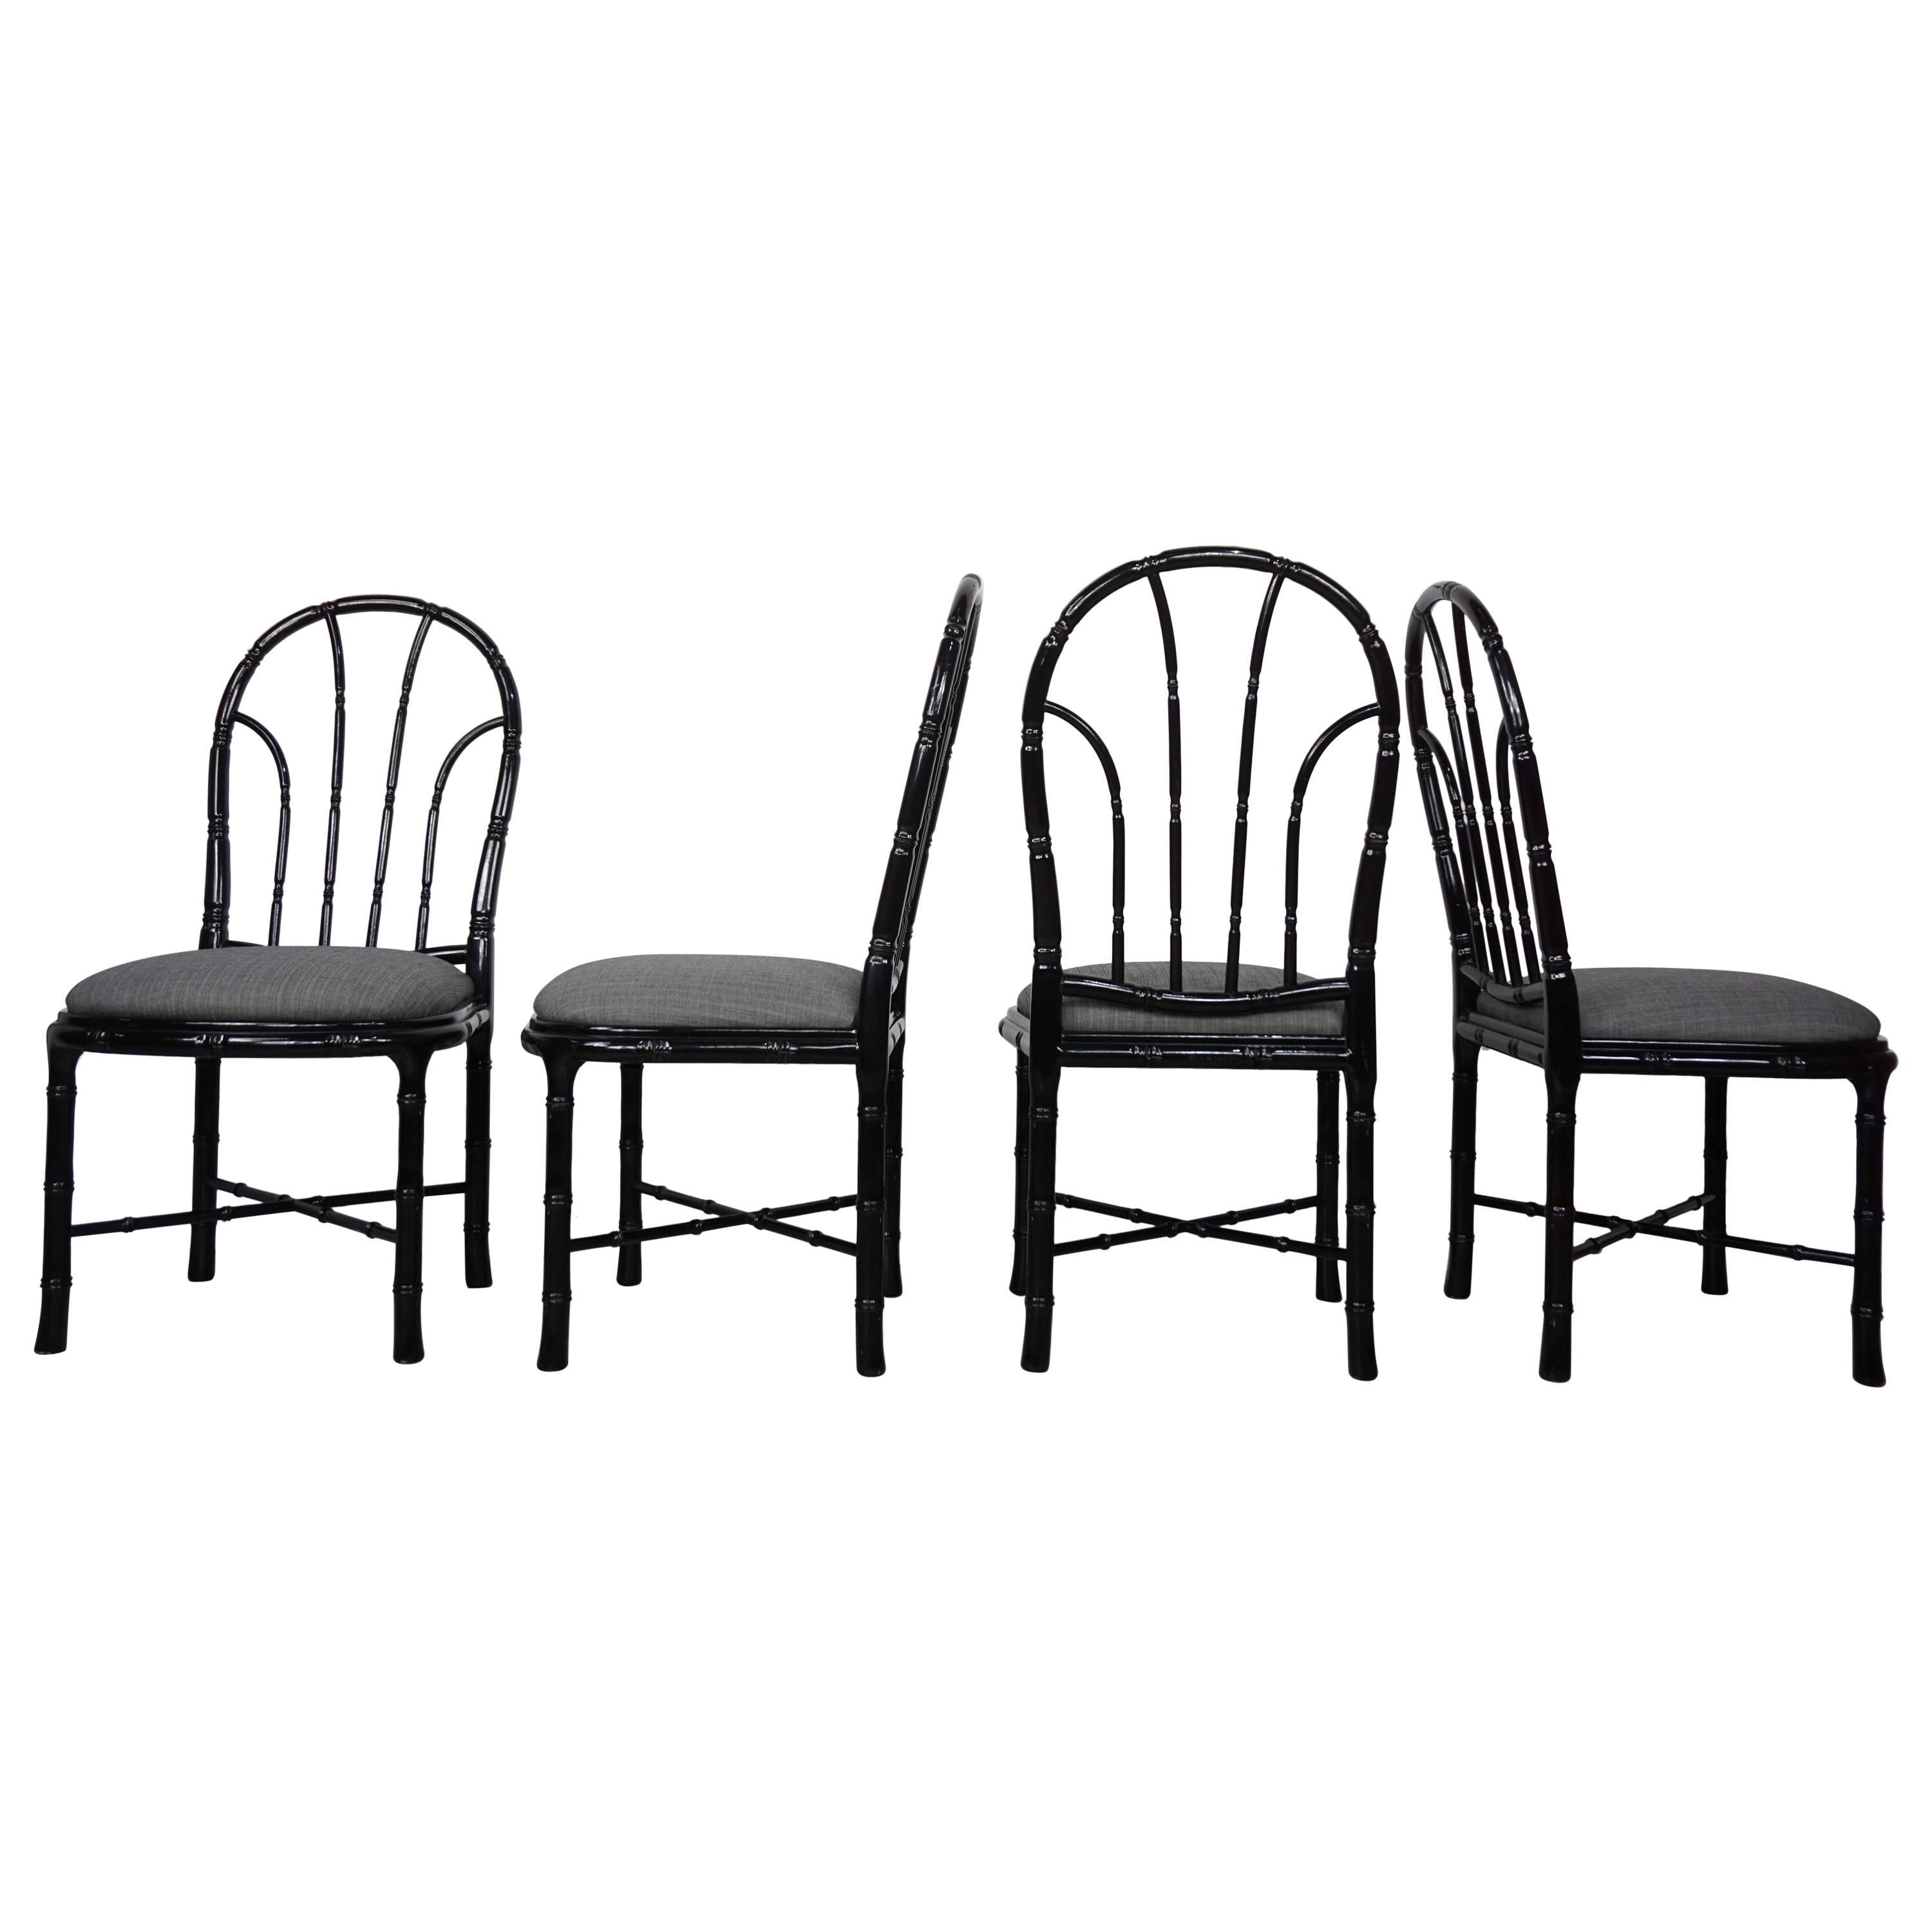 Black Lacquered Wood Set of Four Chairs Optical Illusion